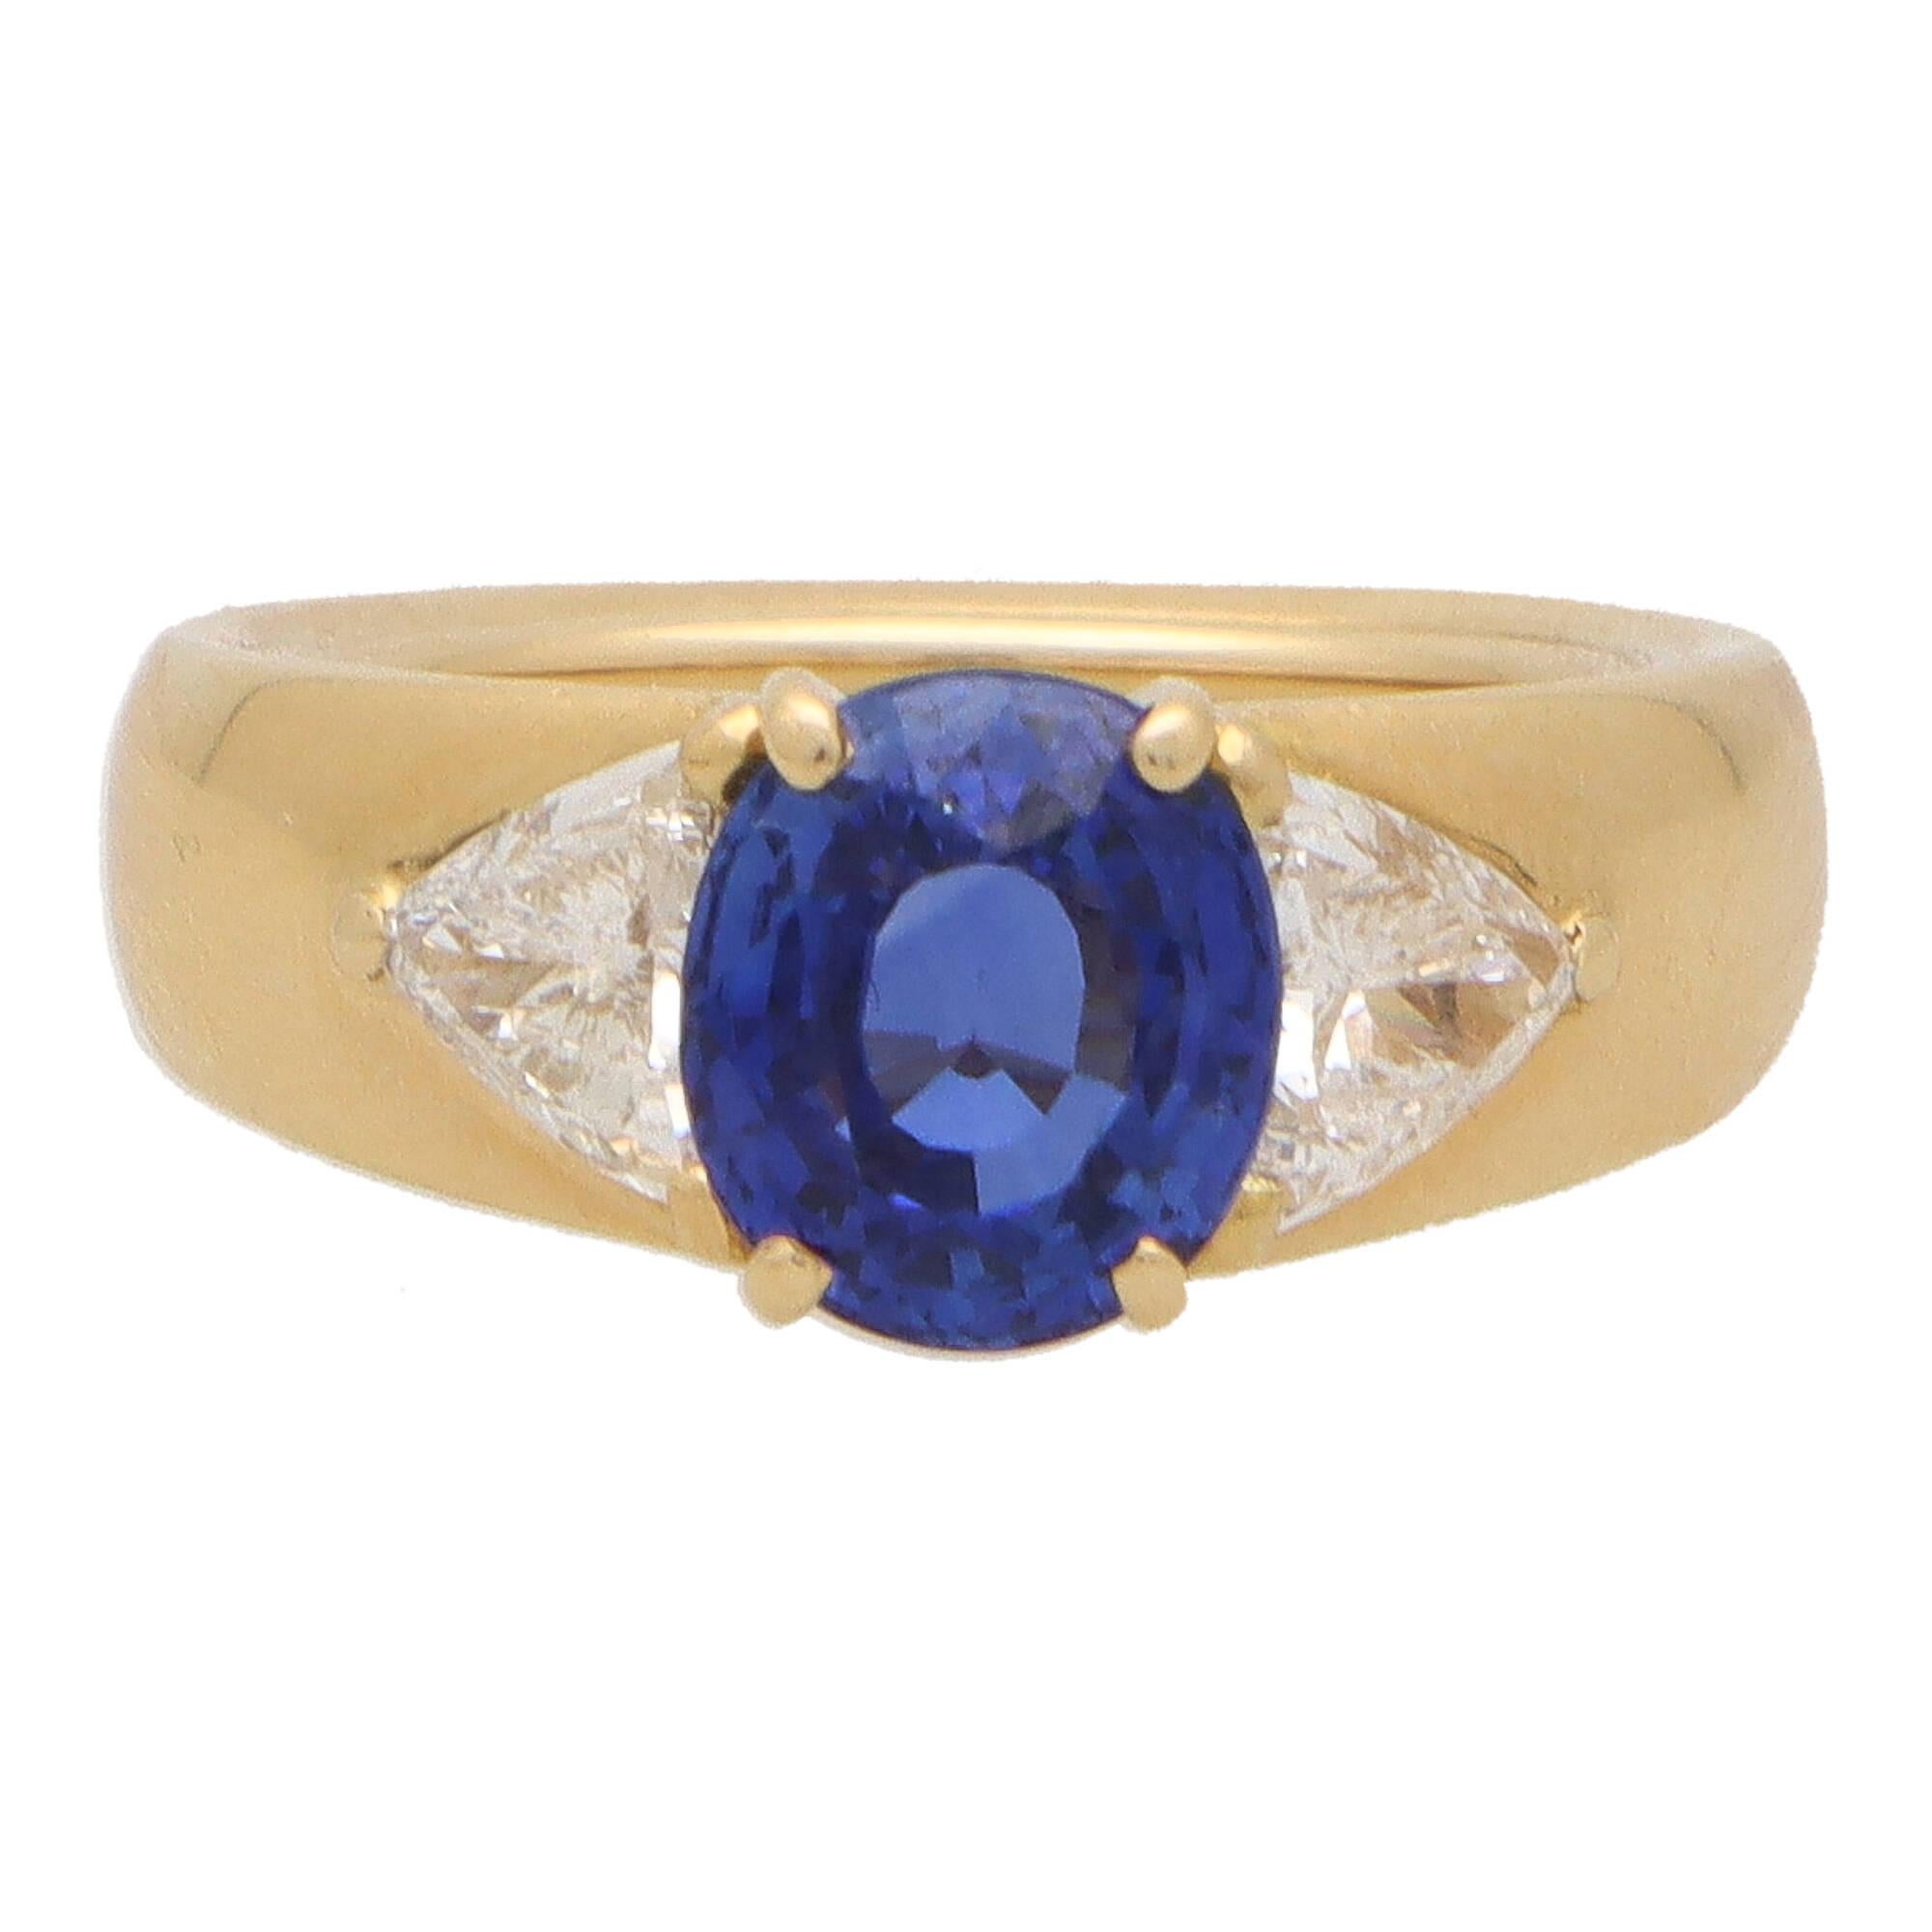 Oval Cut Vintage Cartier GIA Certified Sapphire and Diamond Ring in Yellow Gold For Sale